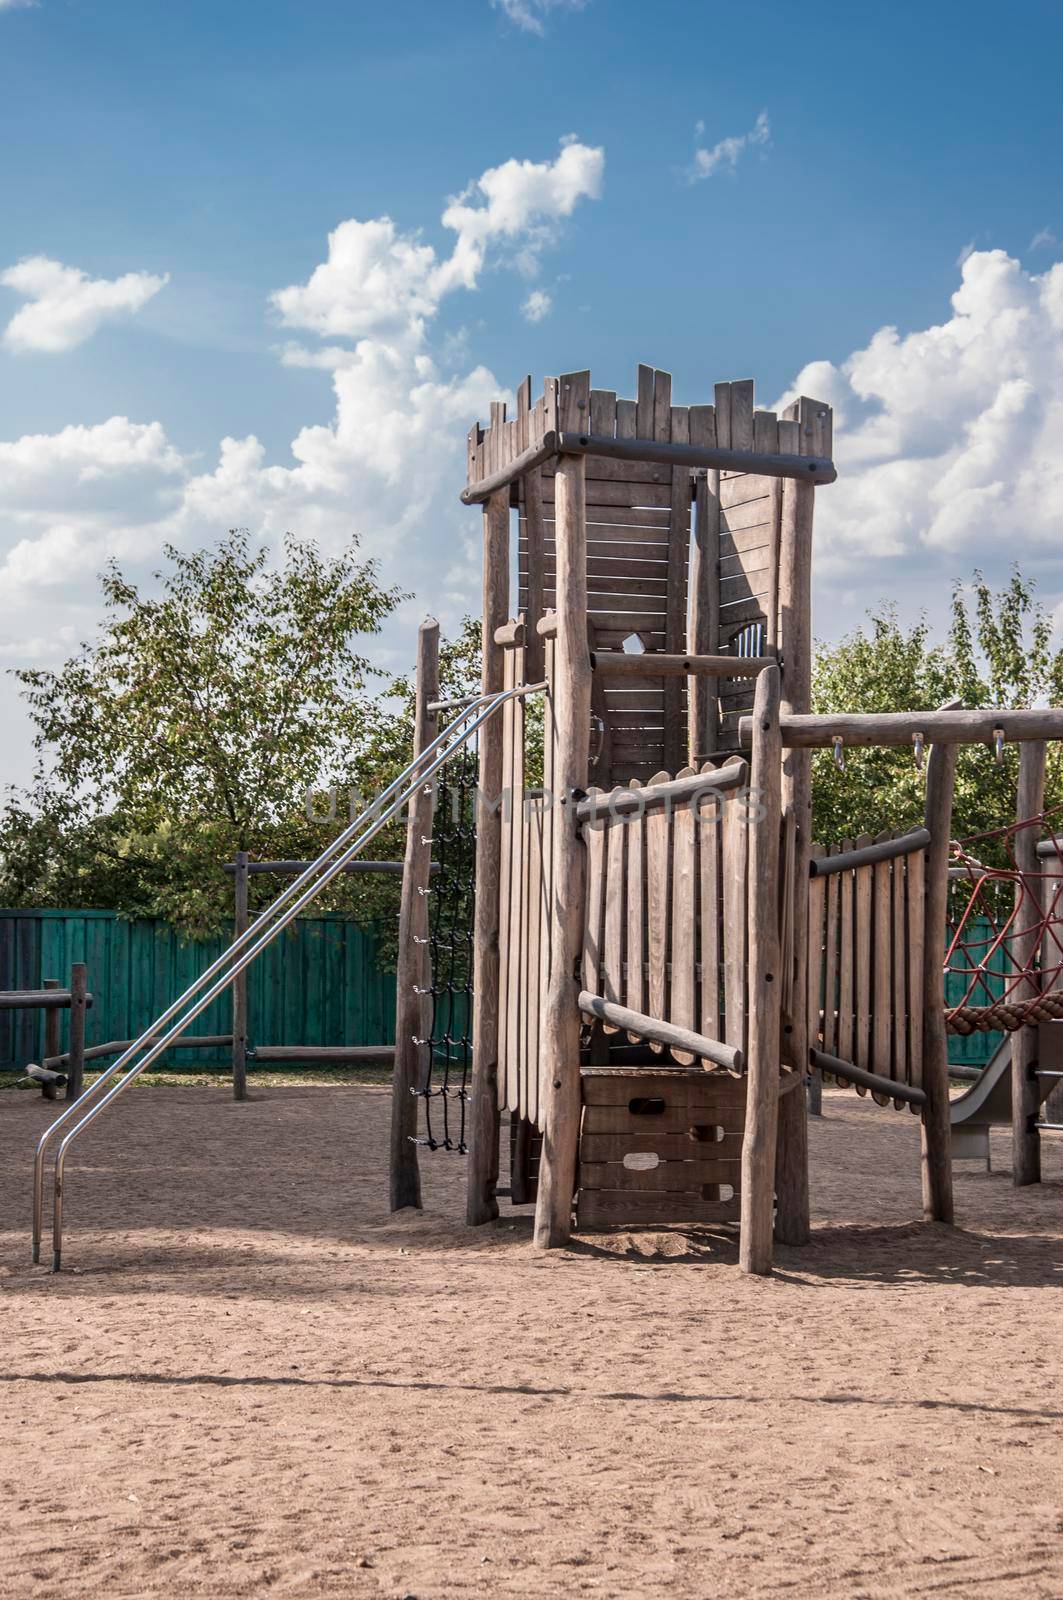 Empty old wood playground in summer day with blue sky and clouds by inxti